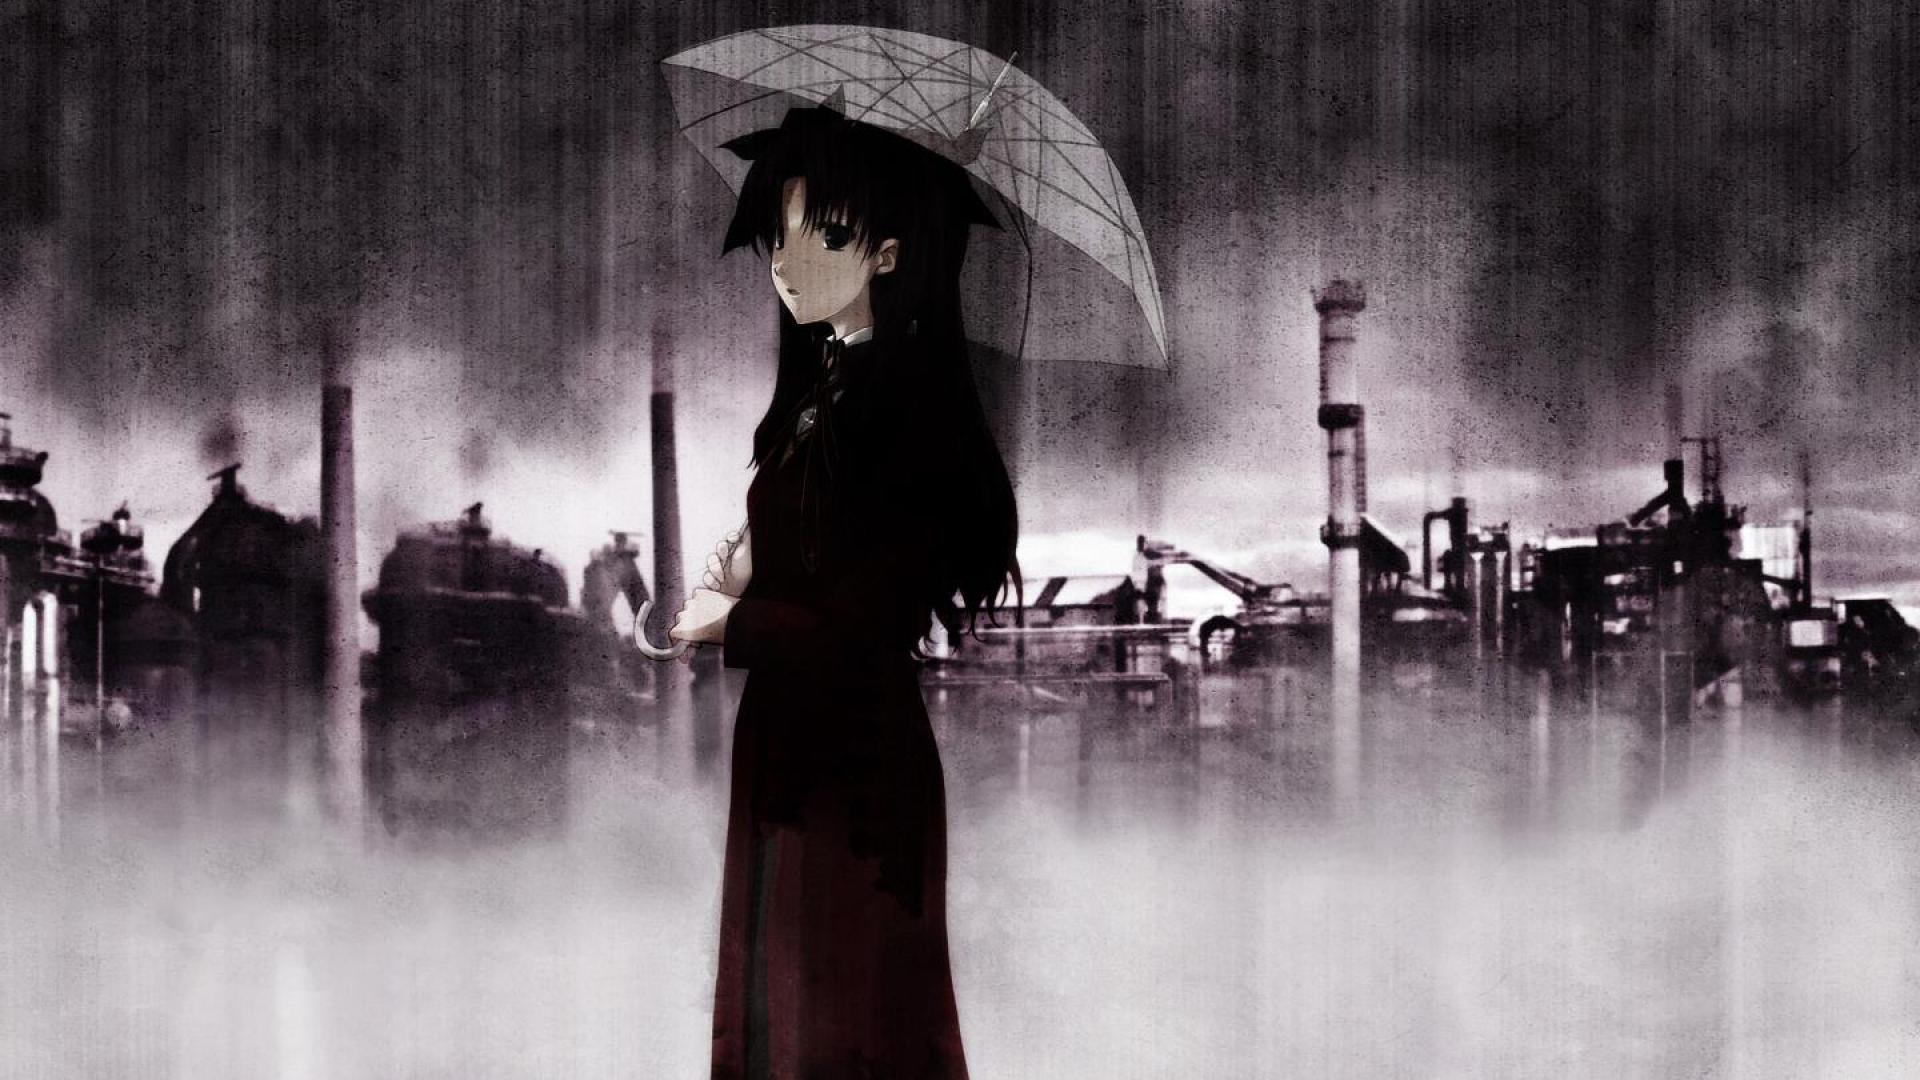 Sad Angel Anime Wallpapers Hd posted by Samantha Anderson.